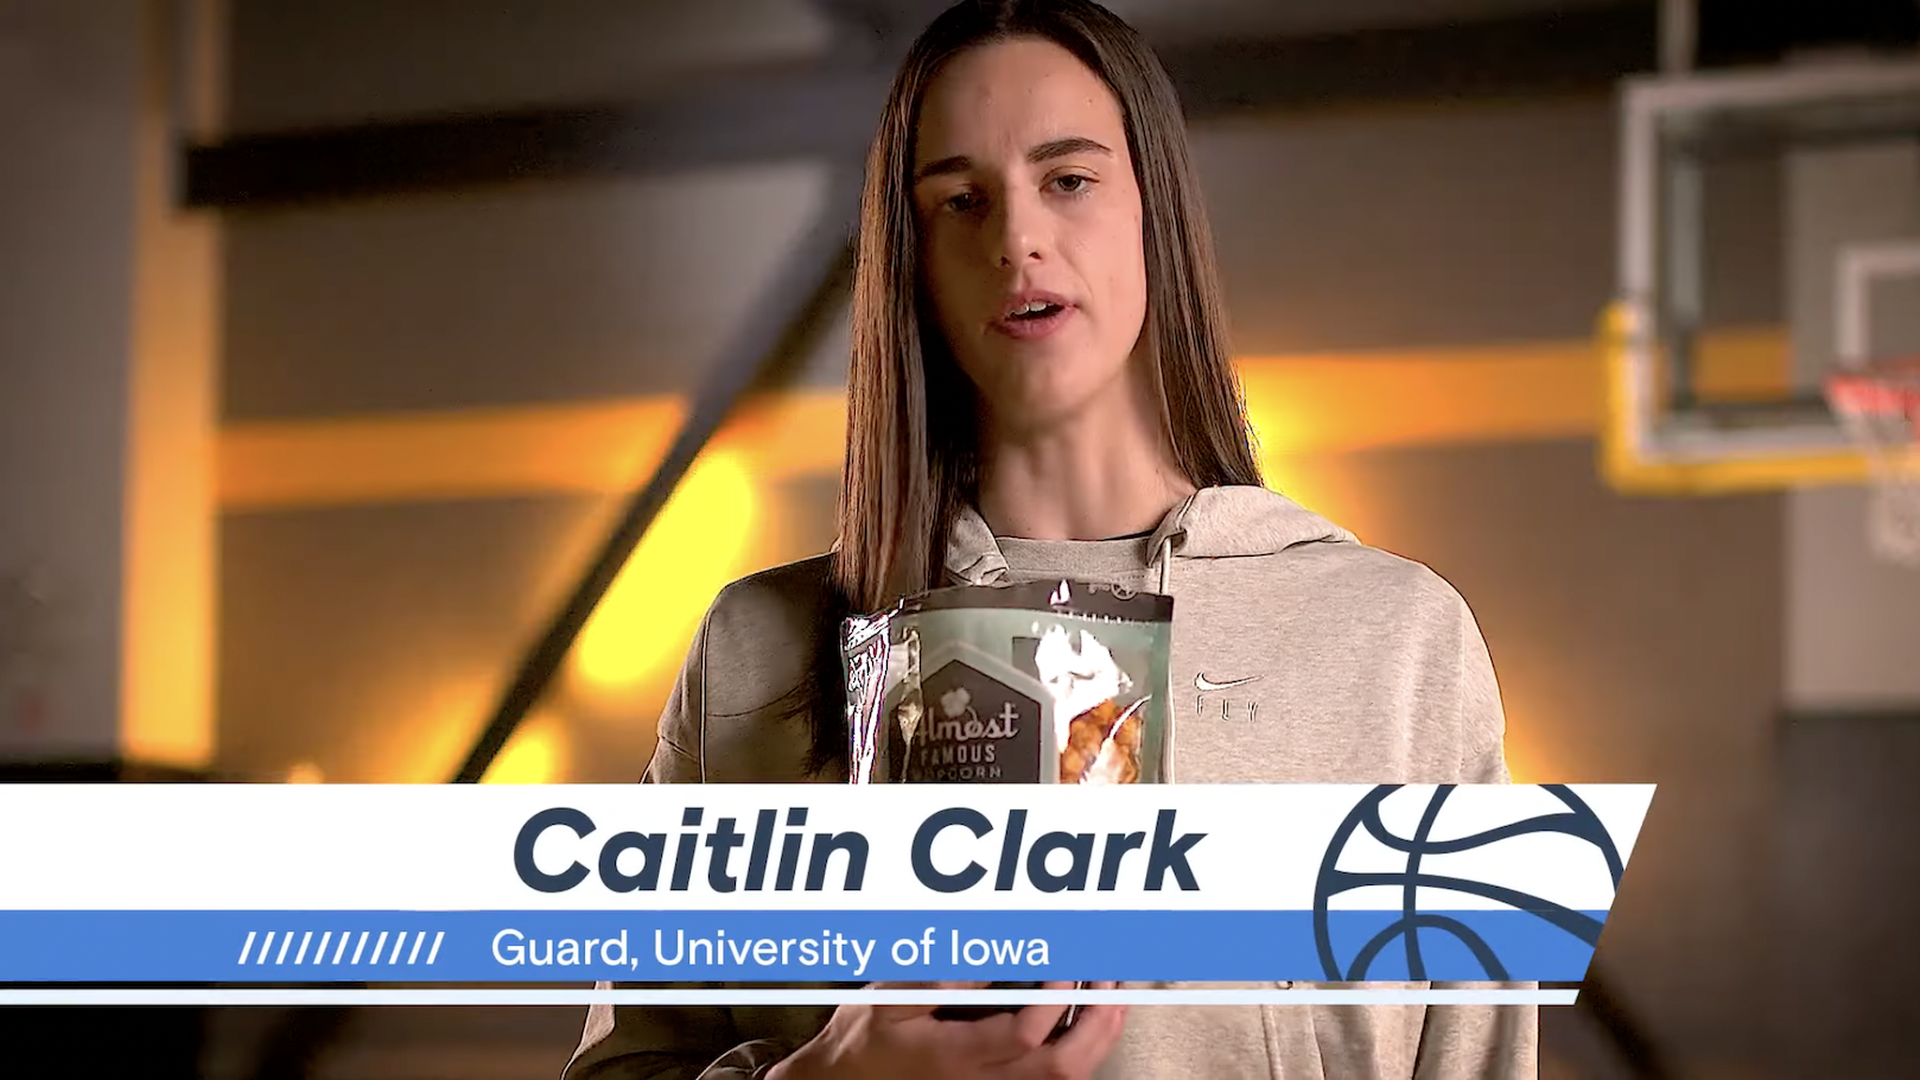 Iowa hoops star Caitlin Clark in an ad promoting small businesses.